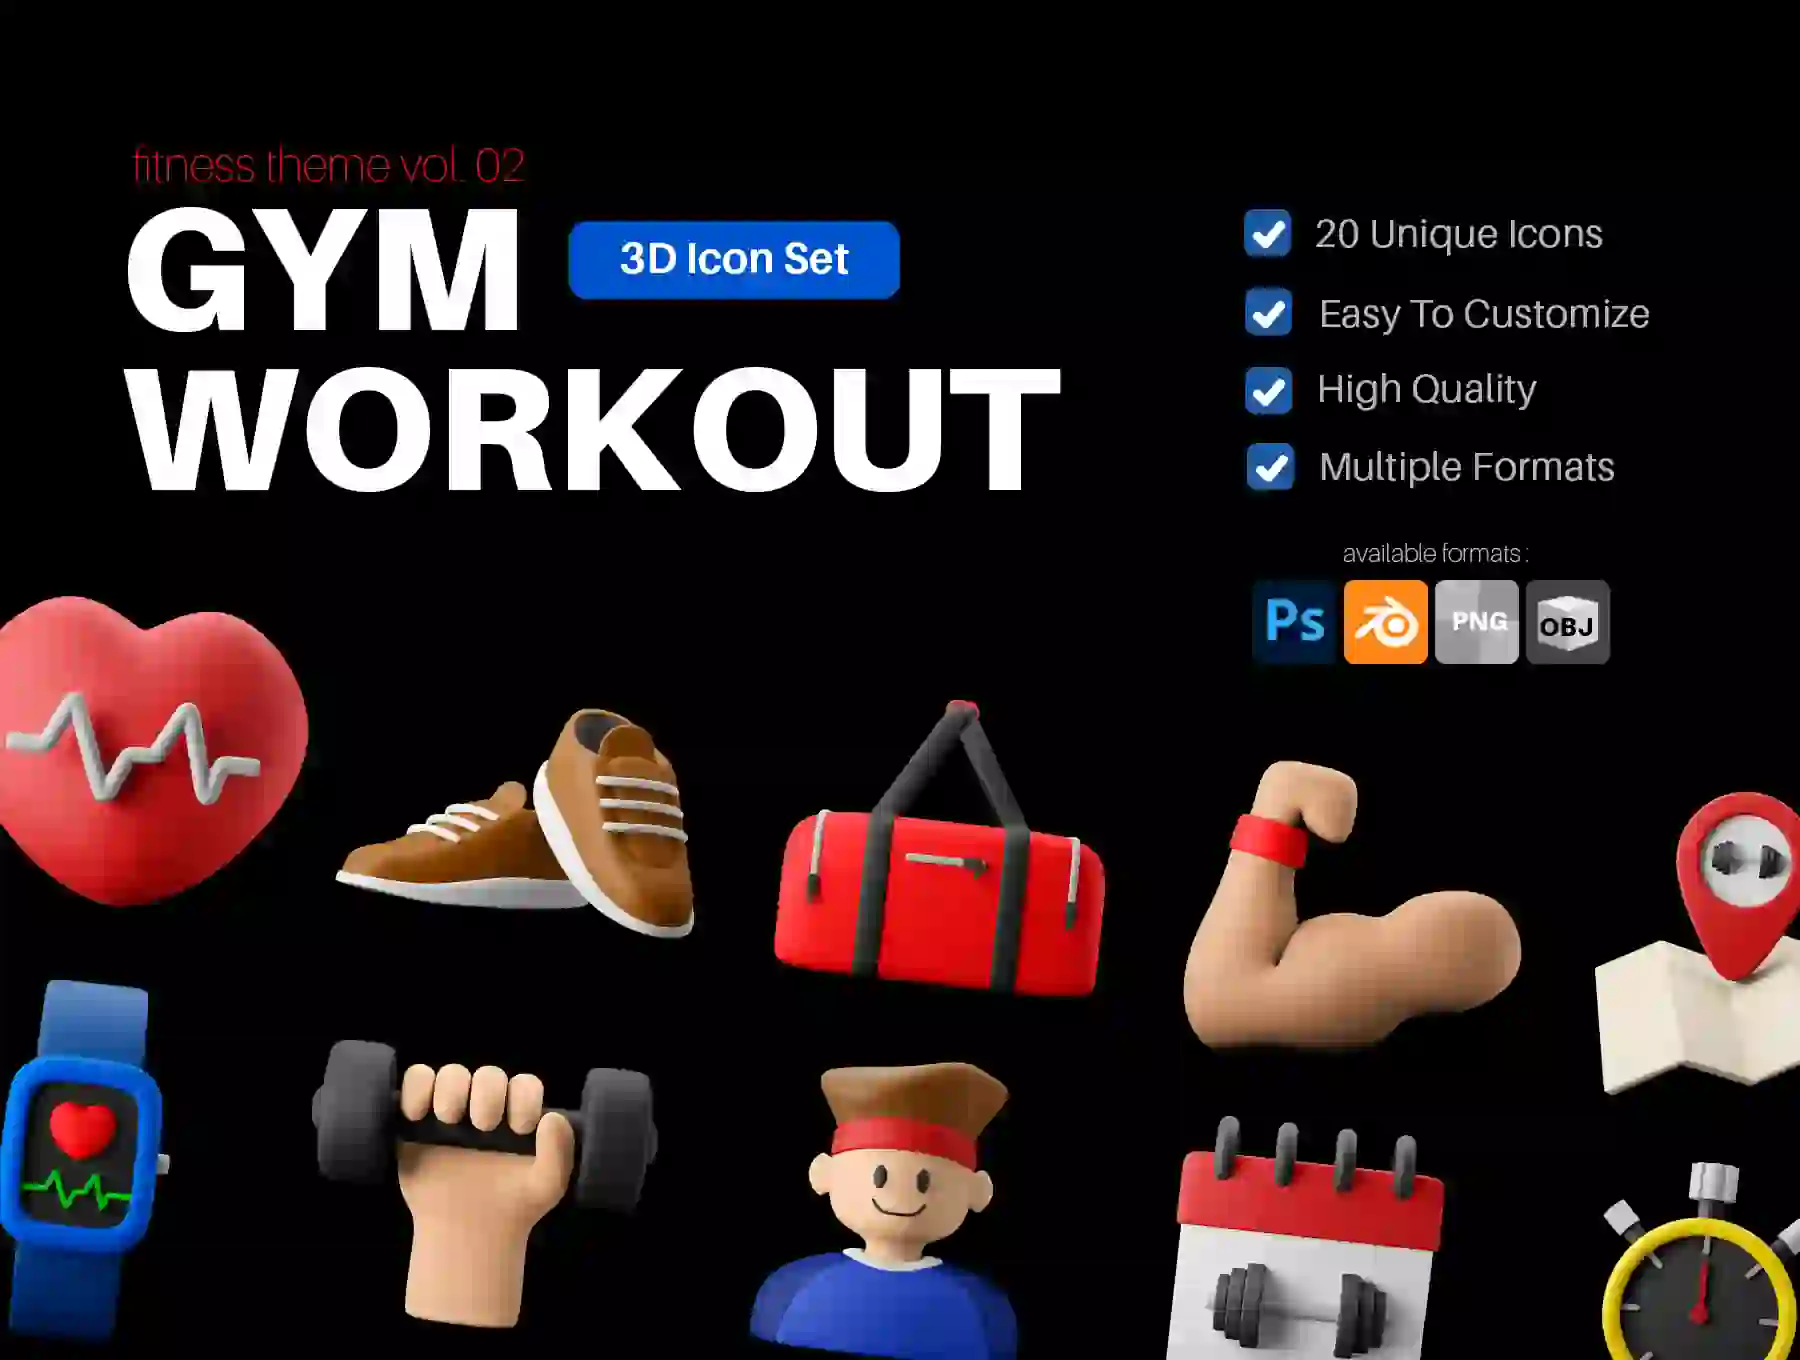 3D Icon Set - Fitness And Gym Workout Theme